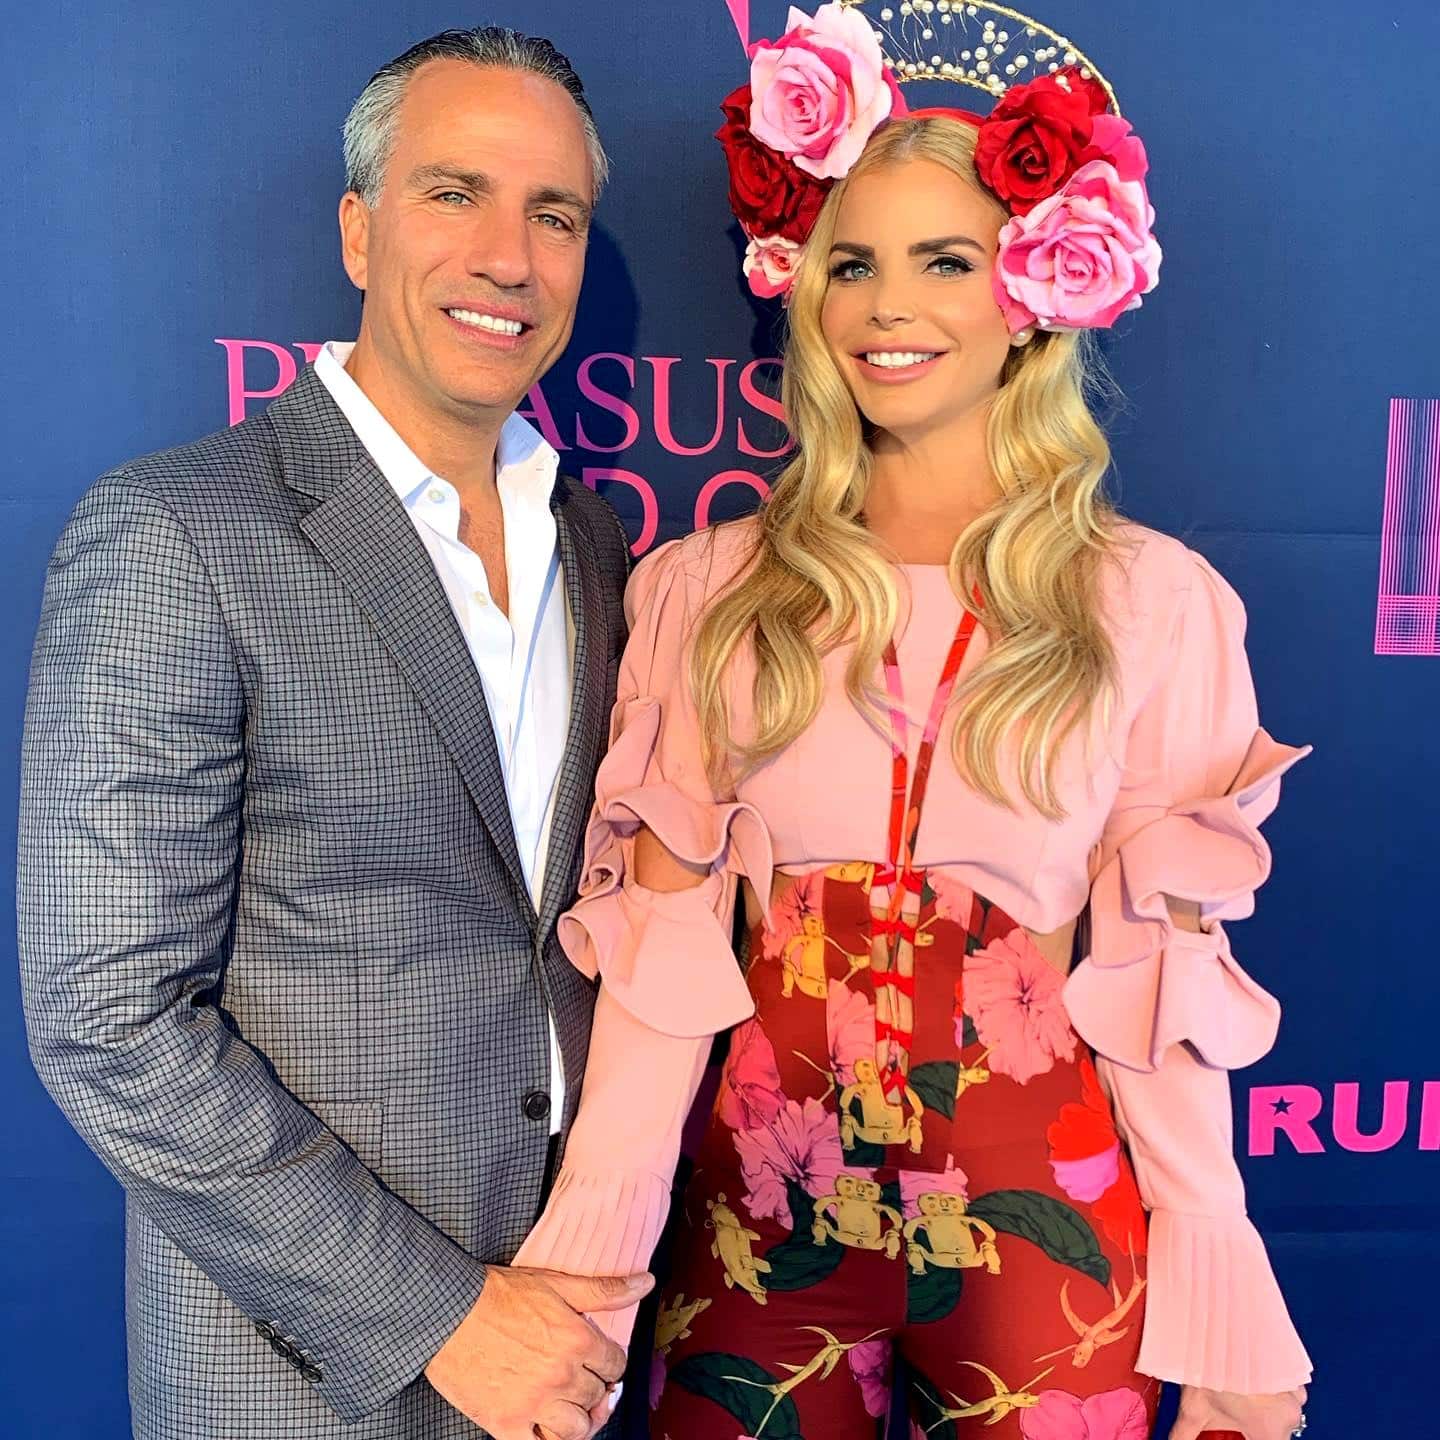 RHOM Star Alexia Echevarria is "Shocked" After Husband Todd Nepola Files for Divorce, Plus She Opens Up About Being "Heartbroken"